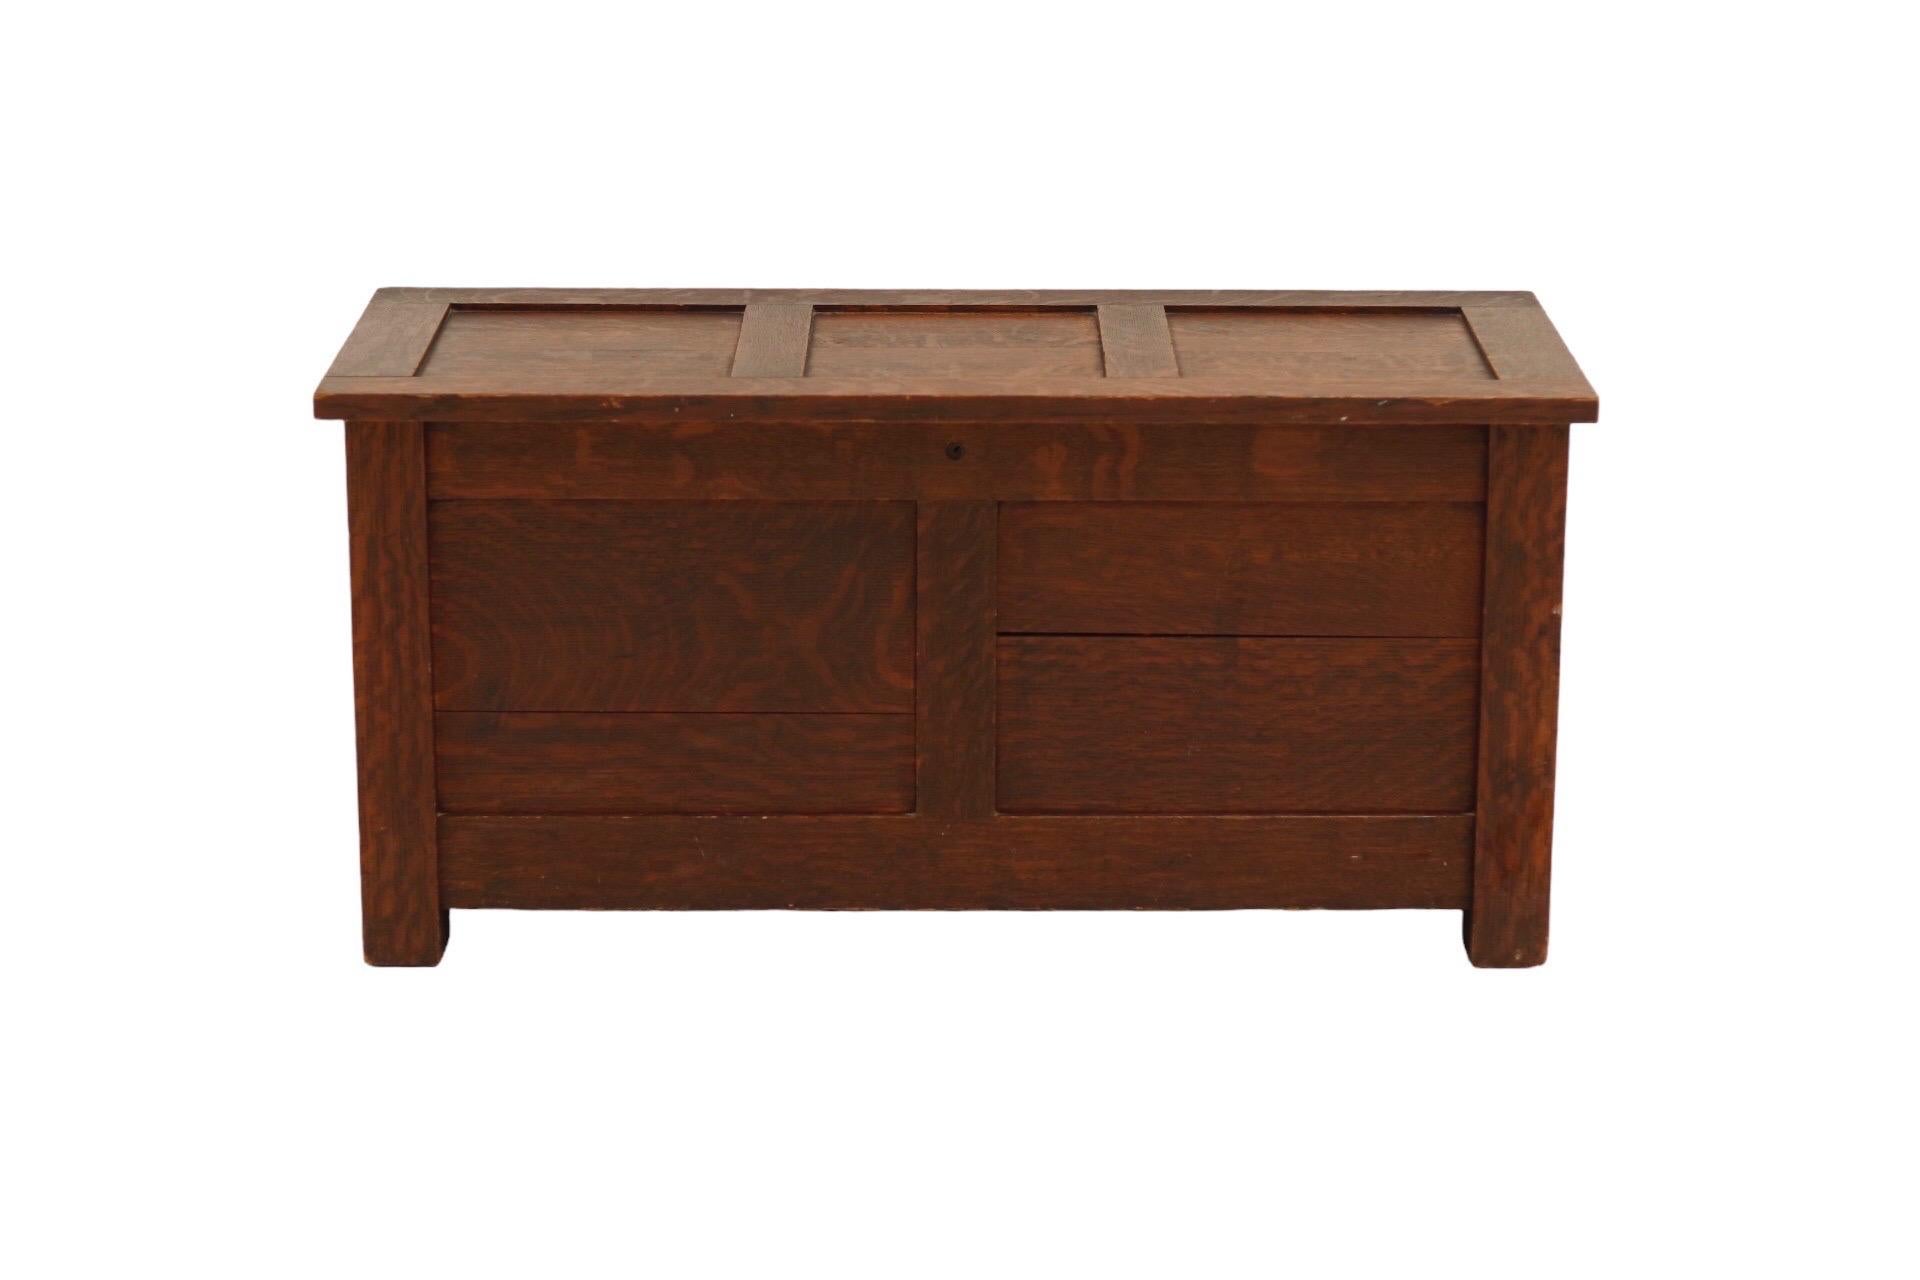 An arts and crafts period blanket chest made of oak, stained in a mahogany brown. The lid with three panels is hinged and opens revealing a lift out tray made of pine, with more storage below.
